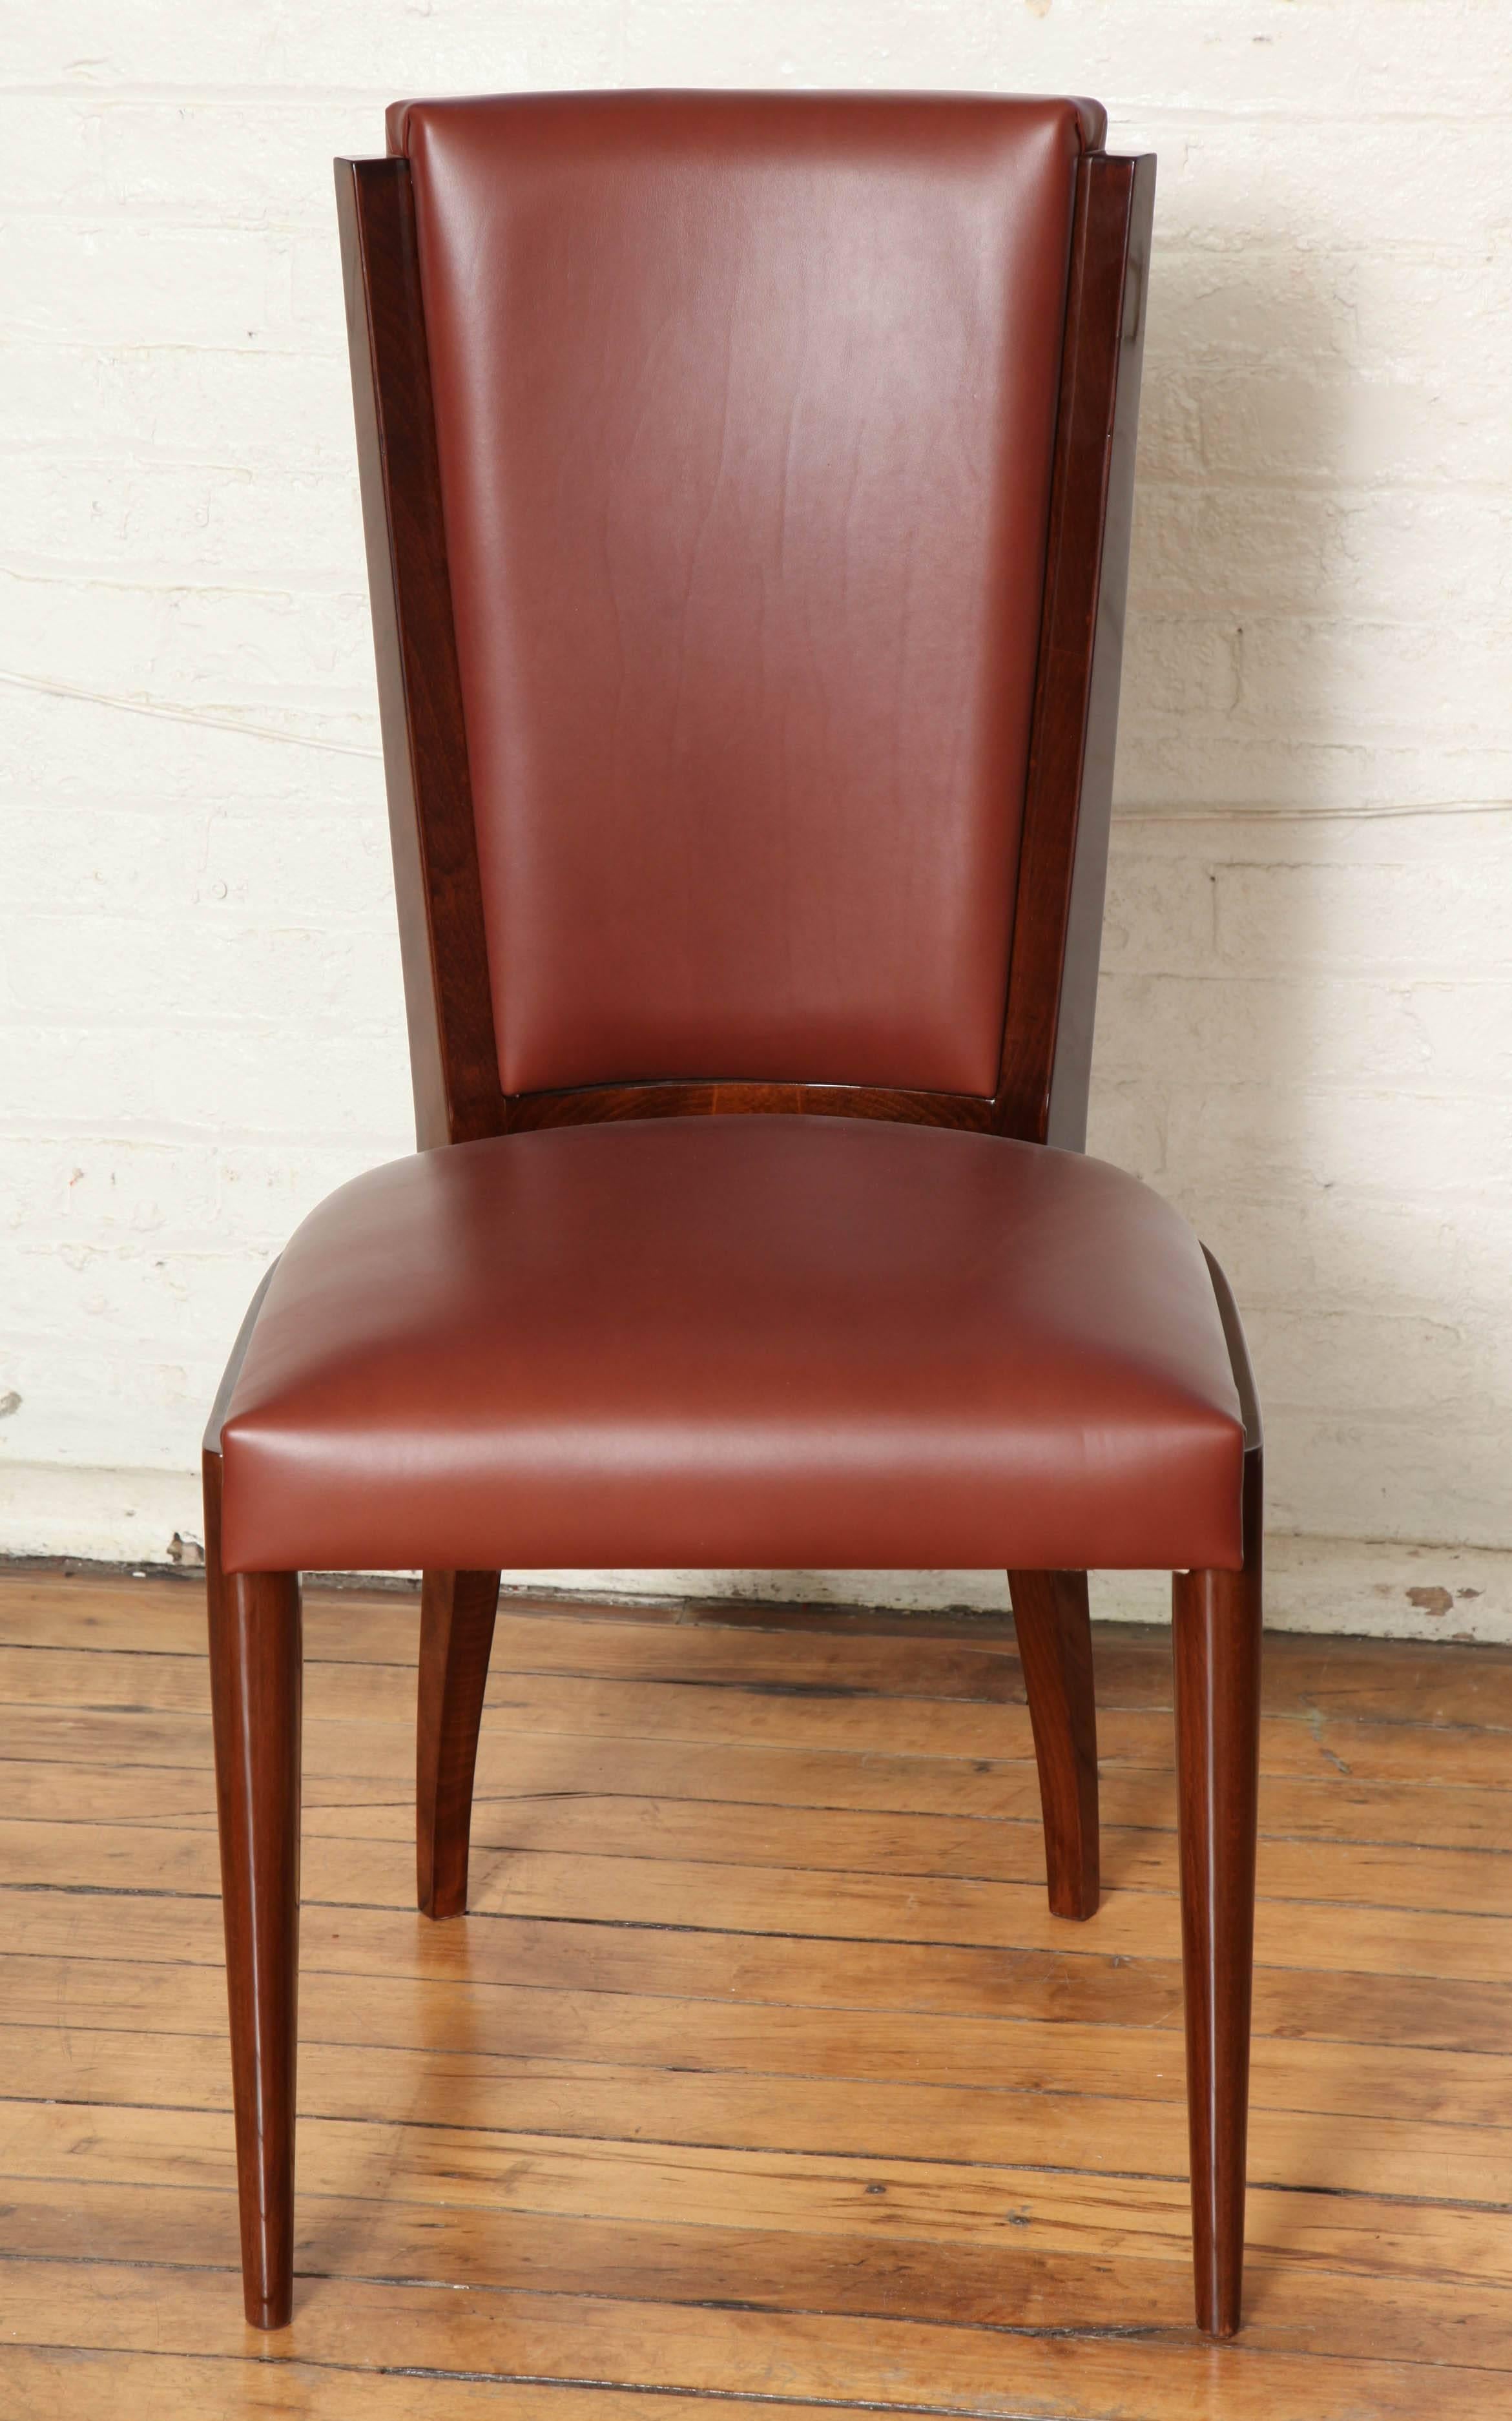 Superb suite of eight Art Deco dining chairs in walnut wood re-upholstered in buttery soft leather.